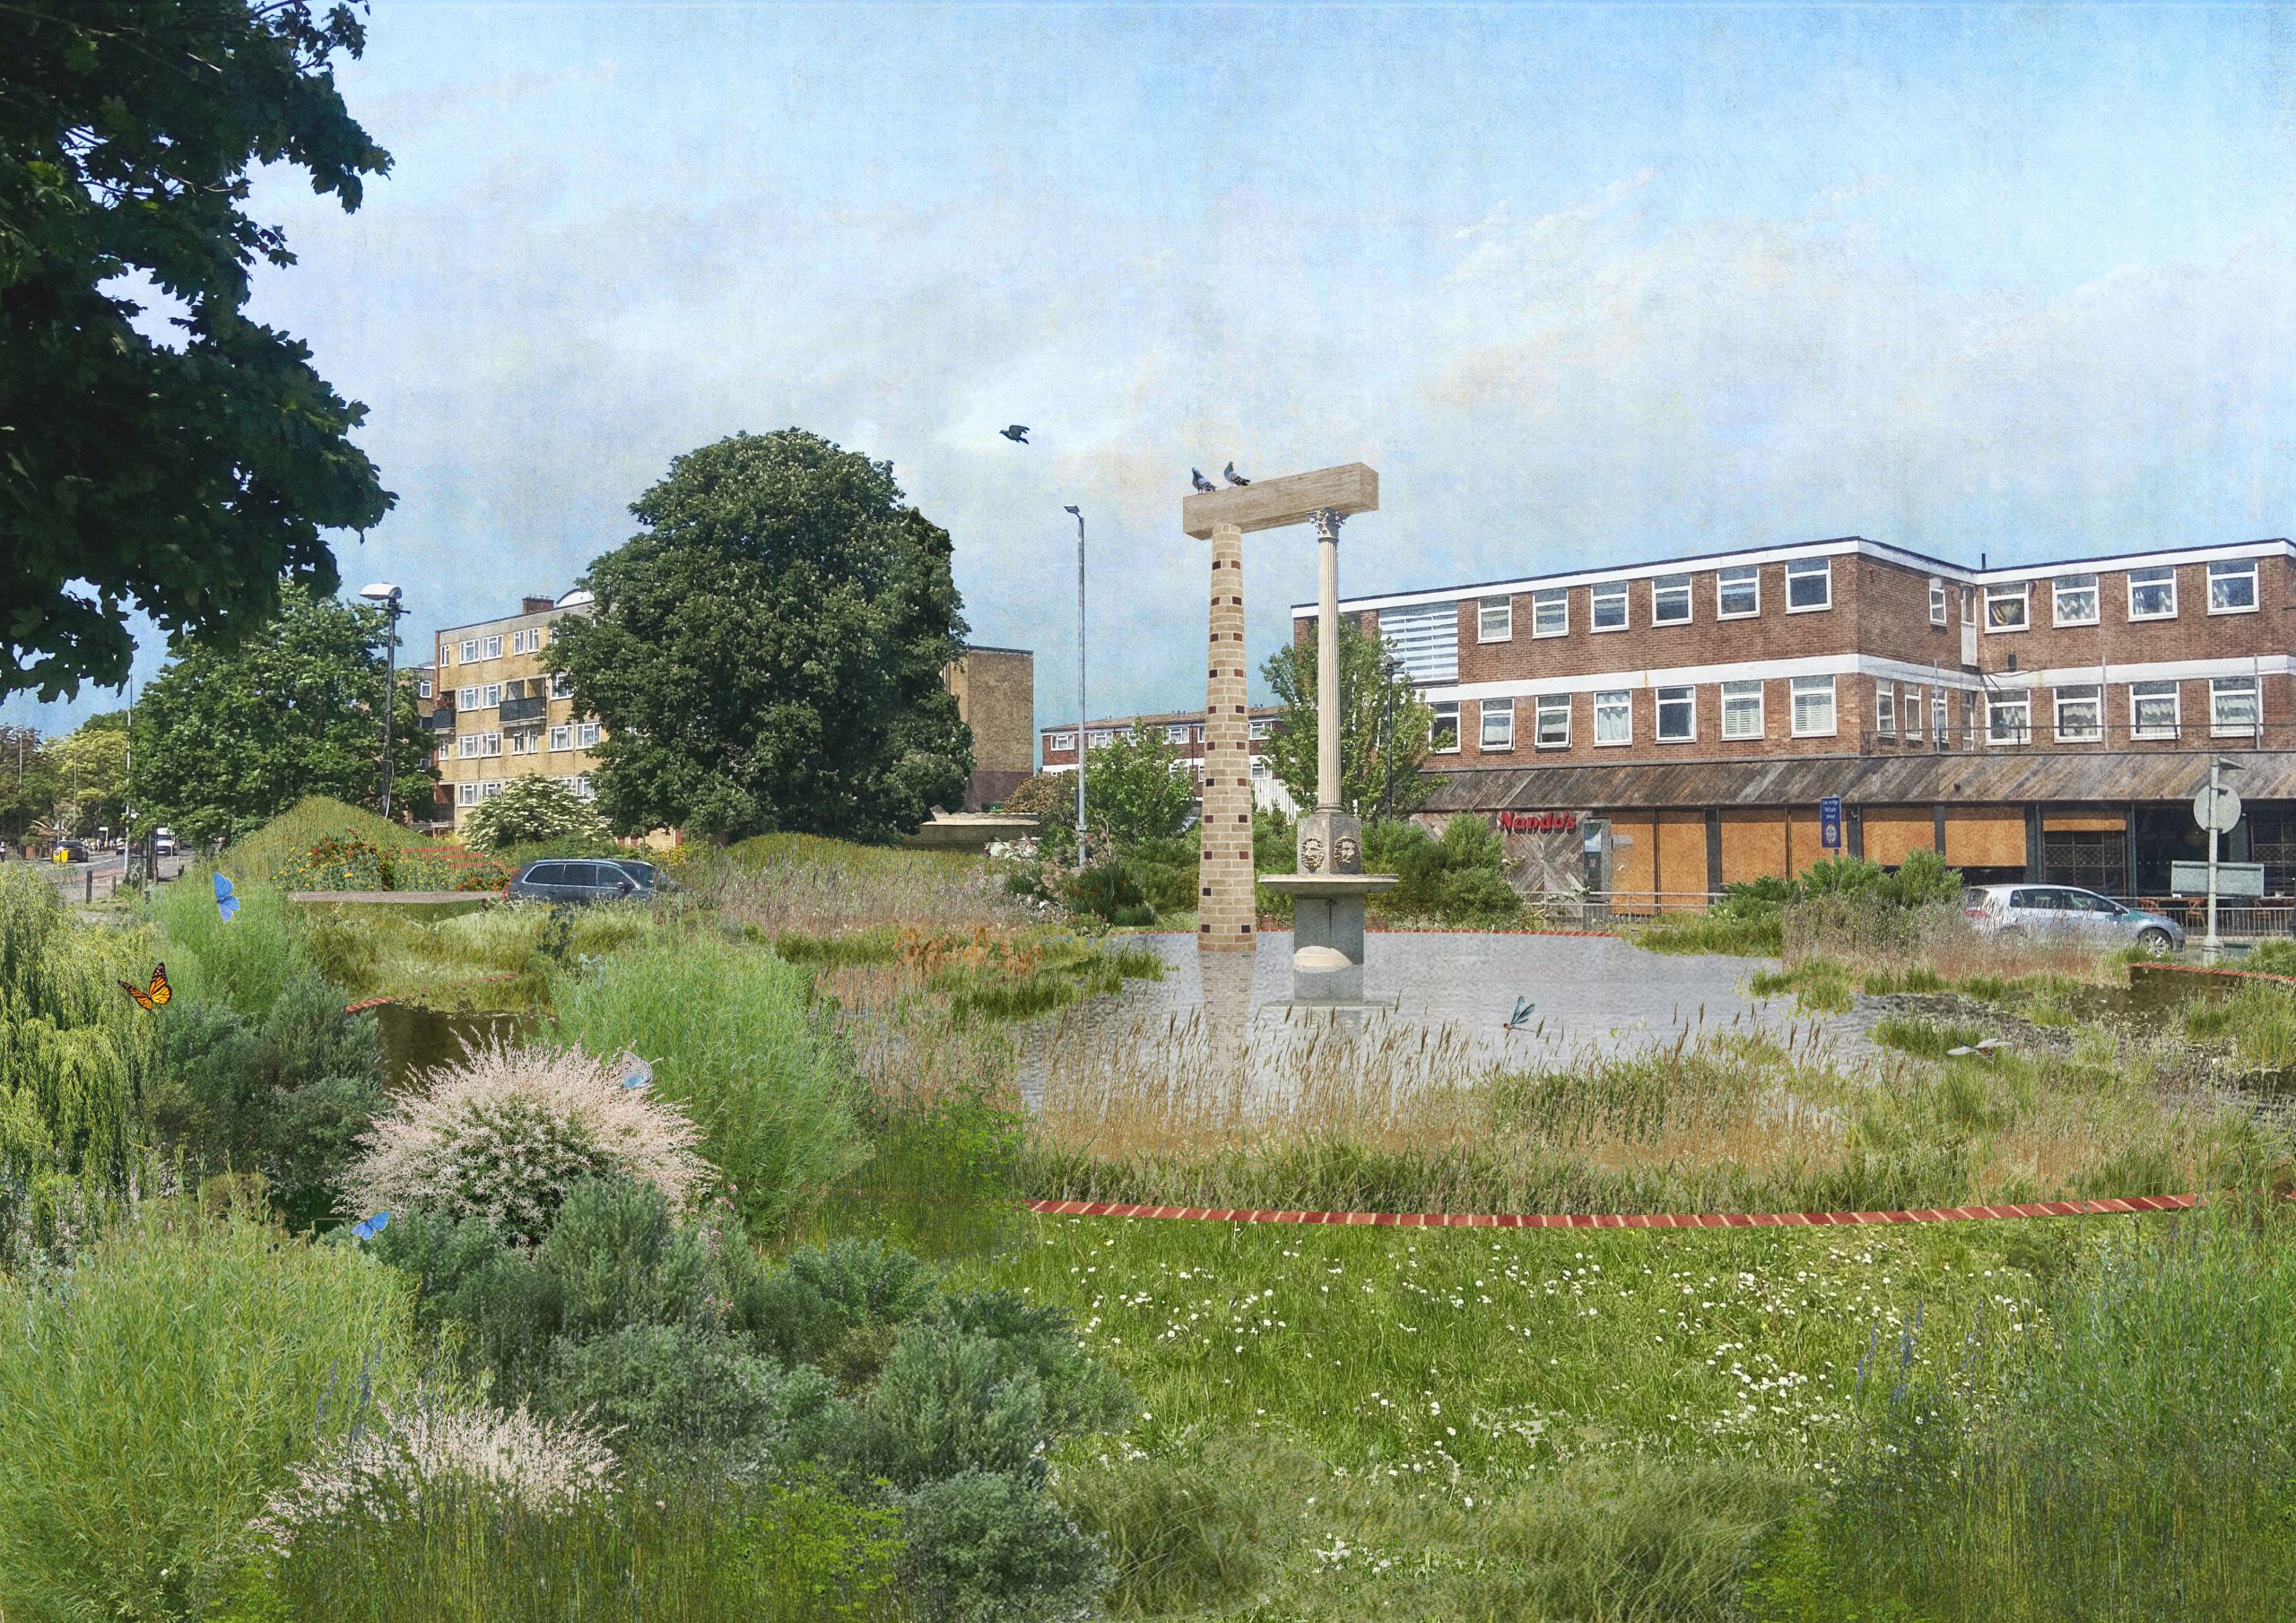 New Malden Fountain roundabout plans: last chance to comment